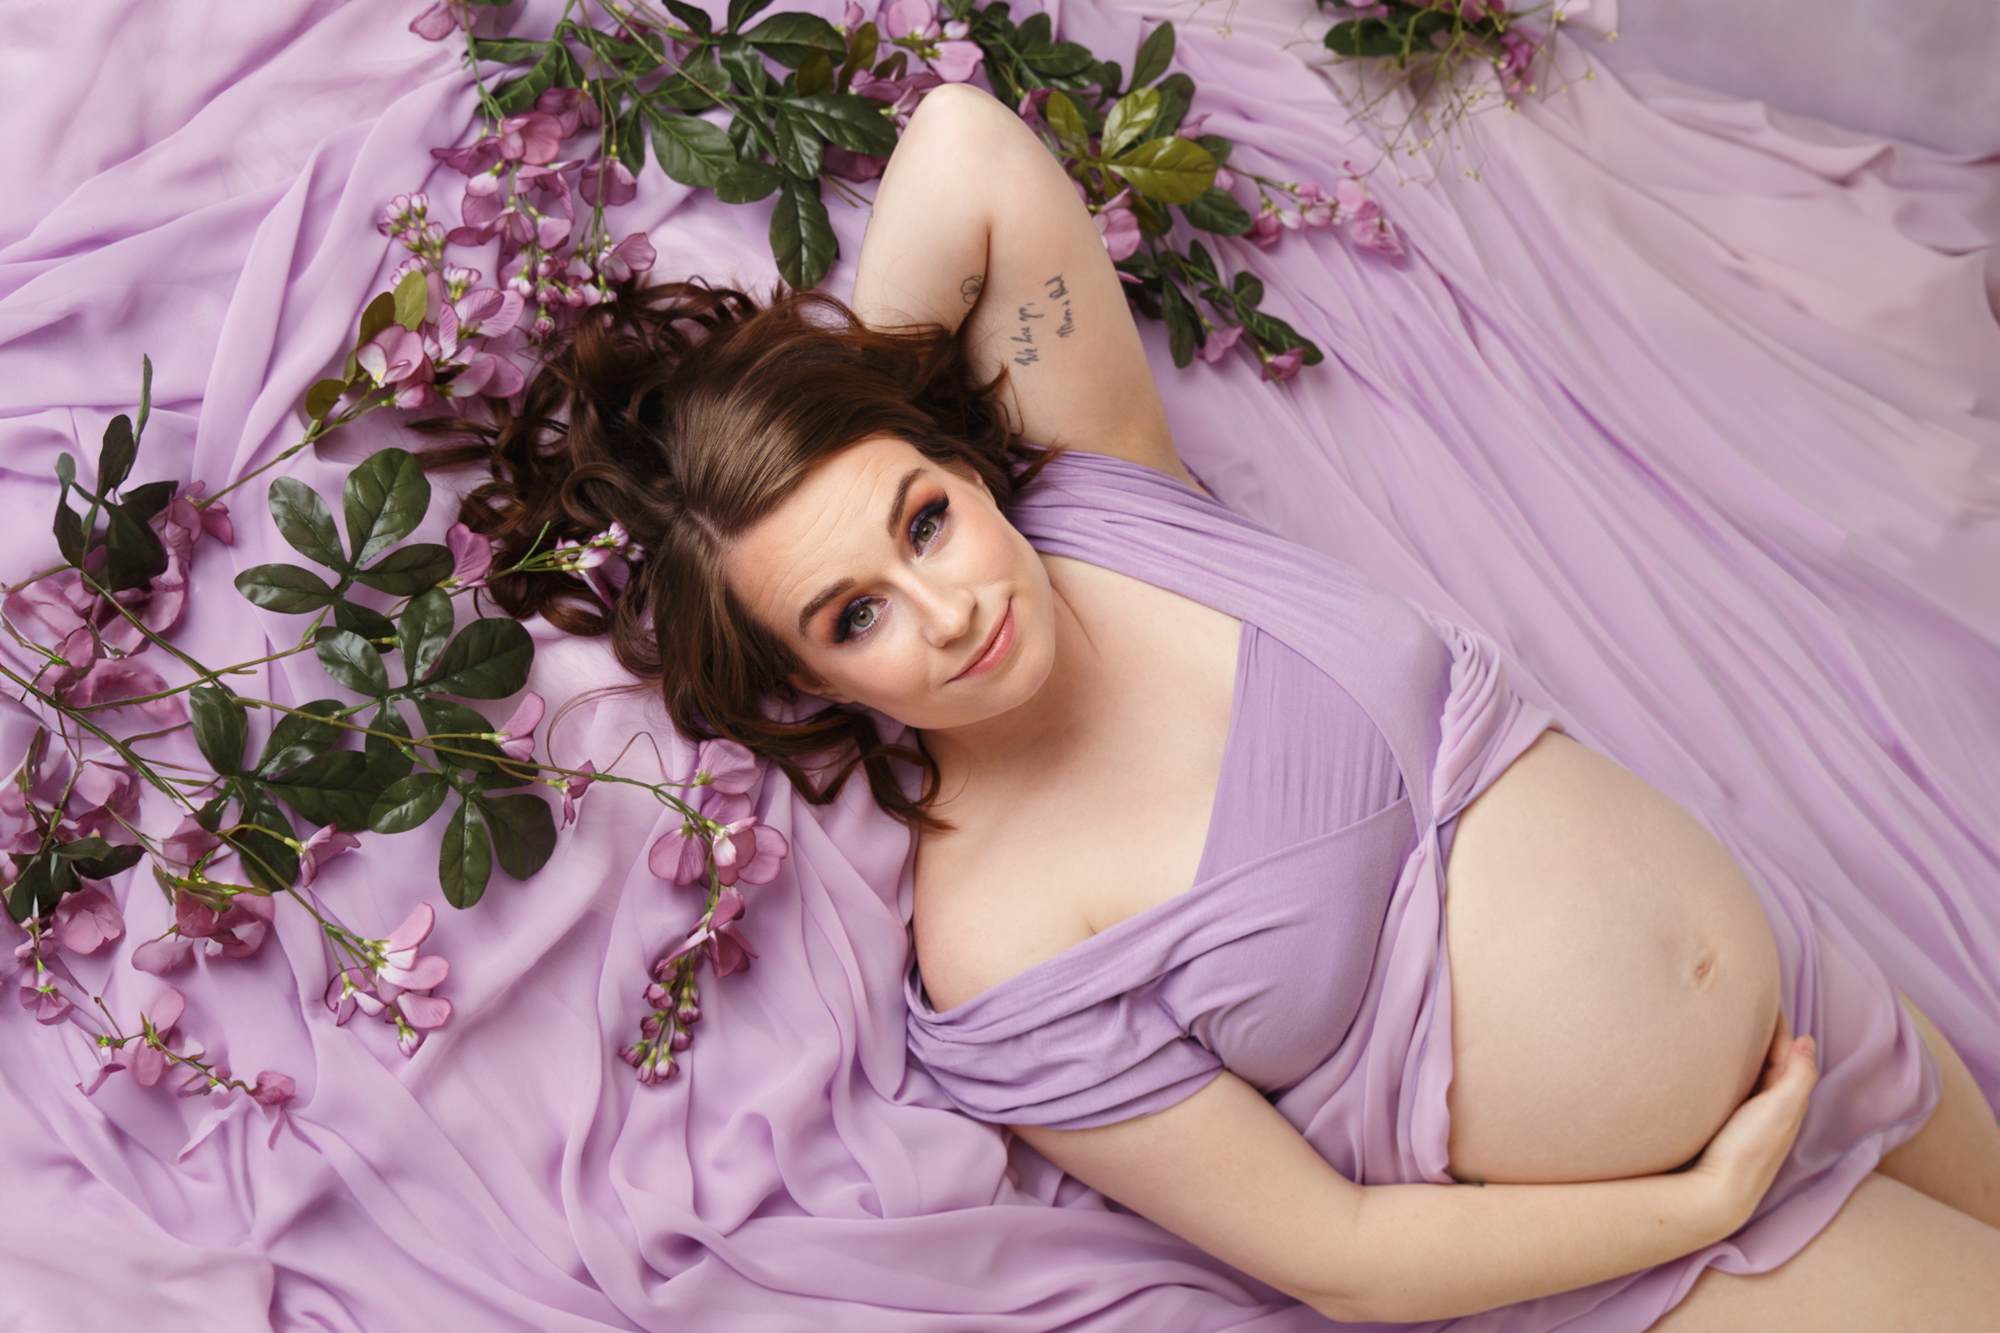 Photo of a pregnant woman laying in lavender colored fabric with purple flowers.